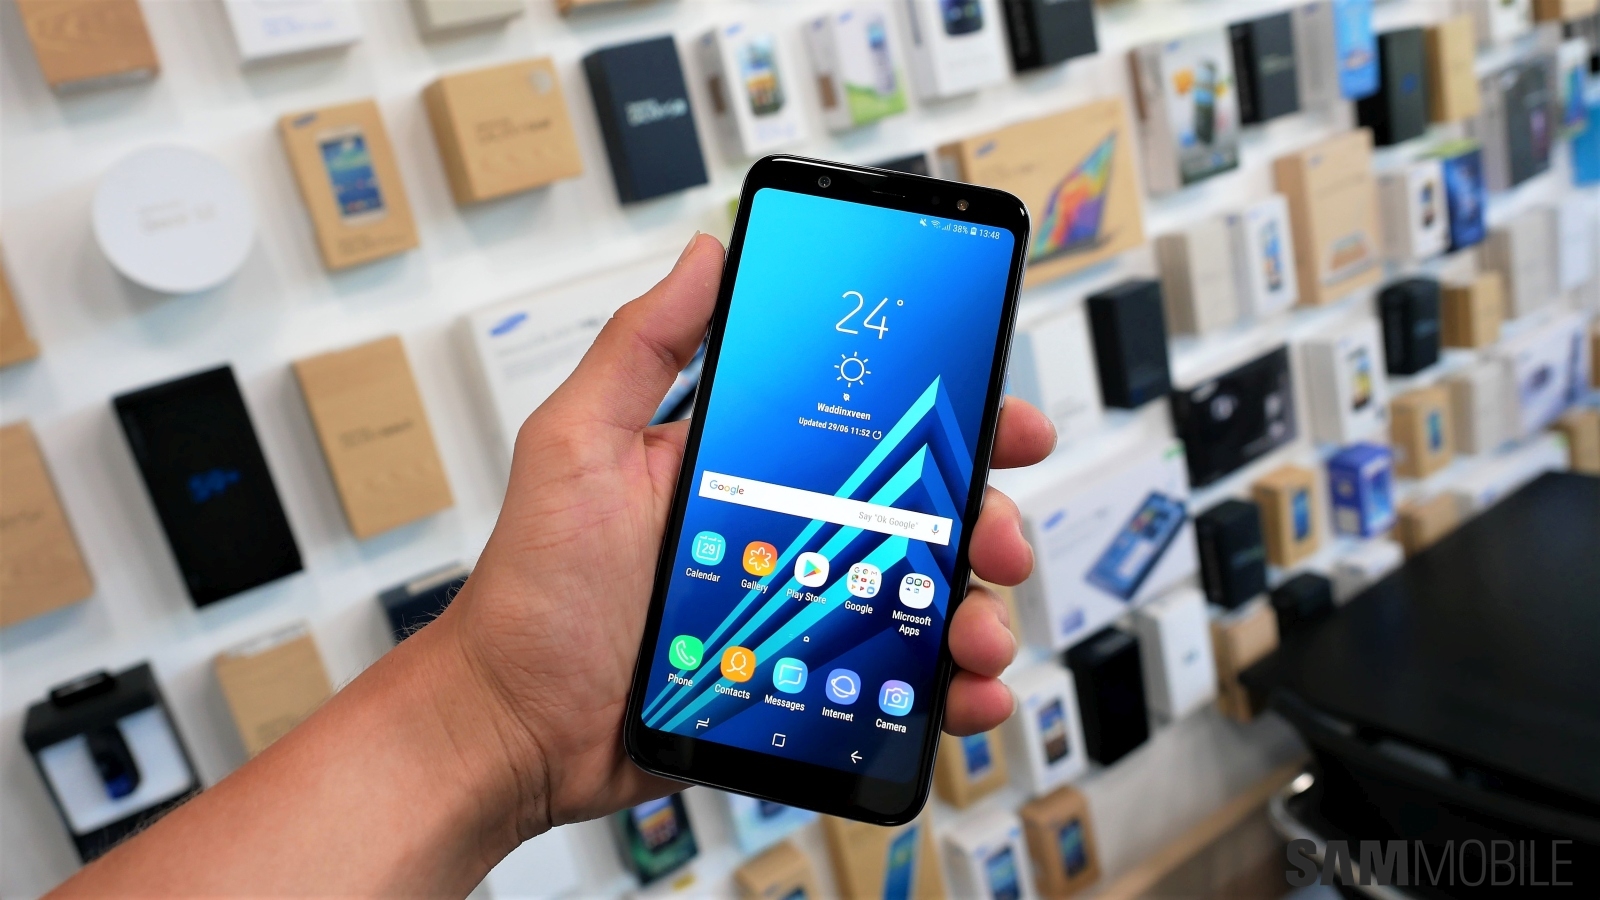 Samsung Introduces the Galaxy A6 and A6+ Featuring an Advanced